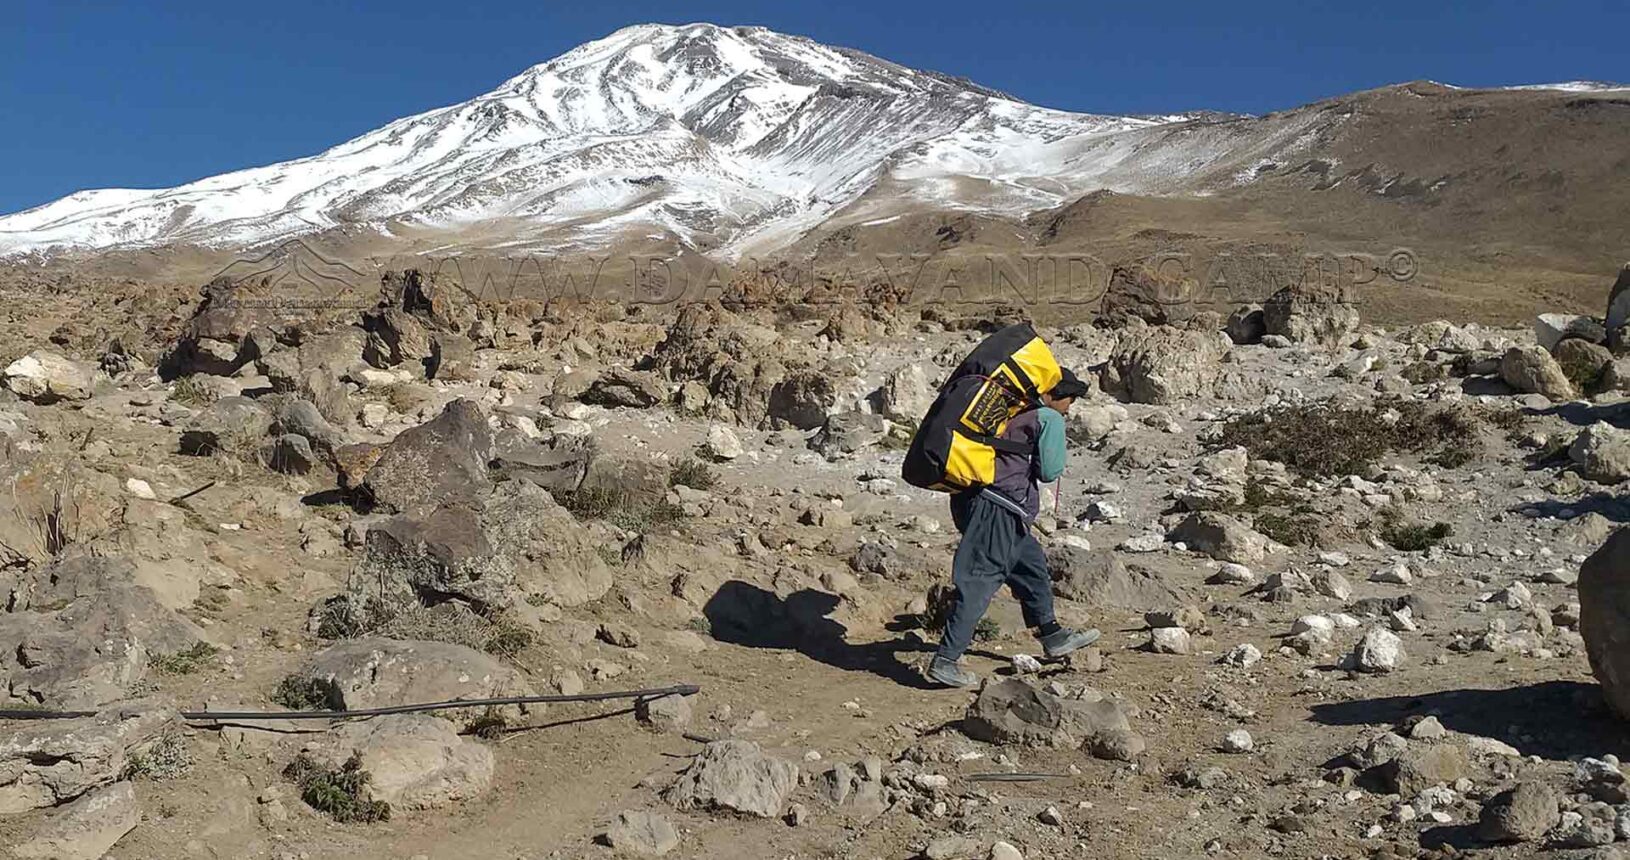 A dedicated porter carries a duffel bag, navigating the rugged terrain at the foothills of the majestic Mount Damavand.